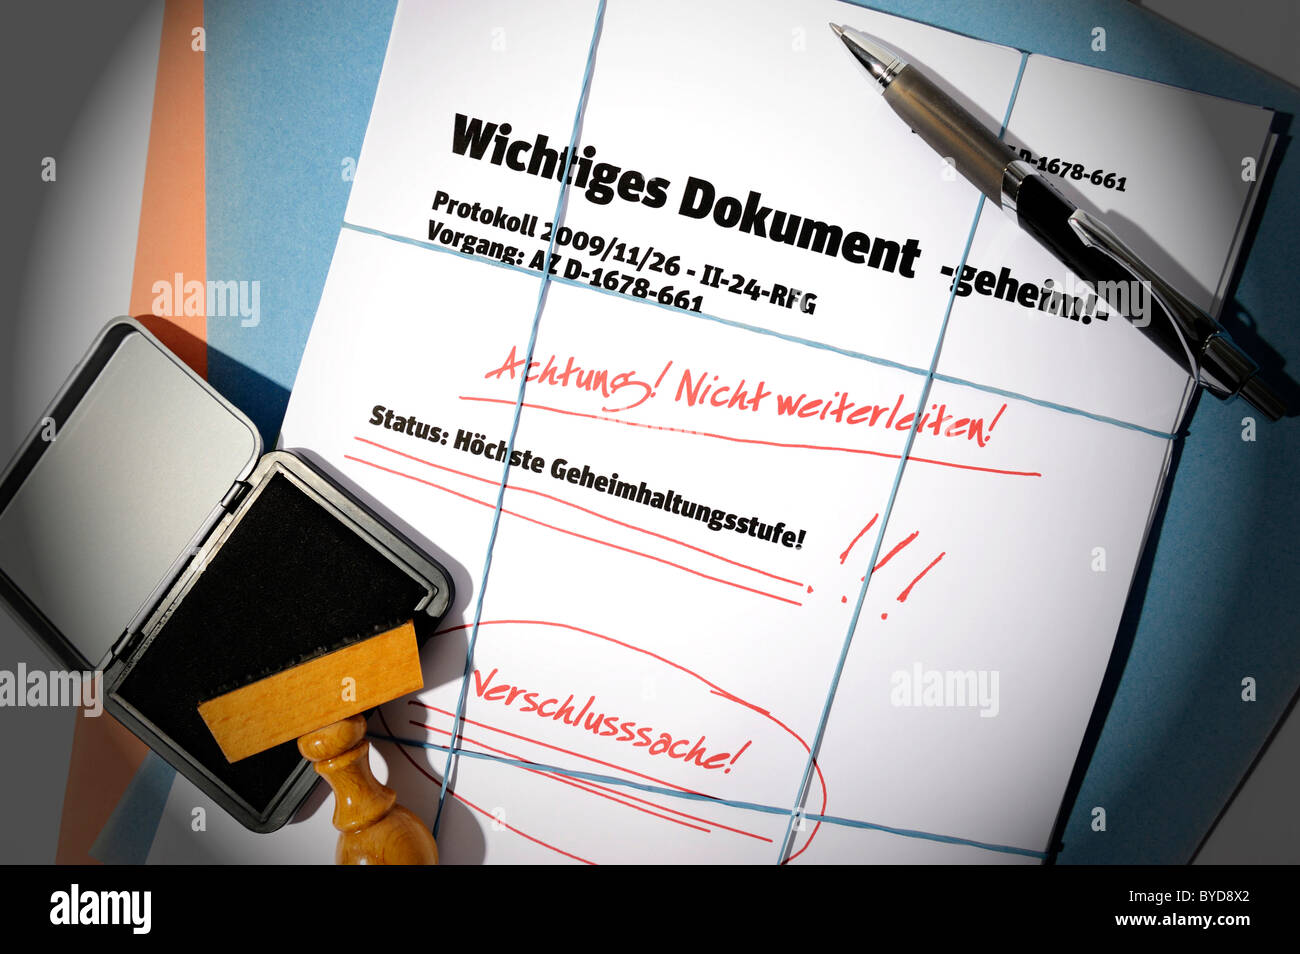 Papers, lettering 'Wichtiges Dokument', German for 'important document', symbolic image for secret documents Stock Photo